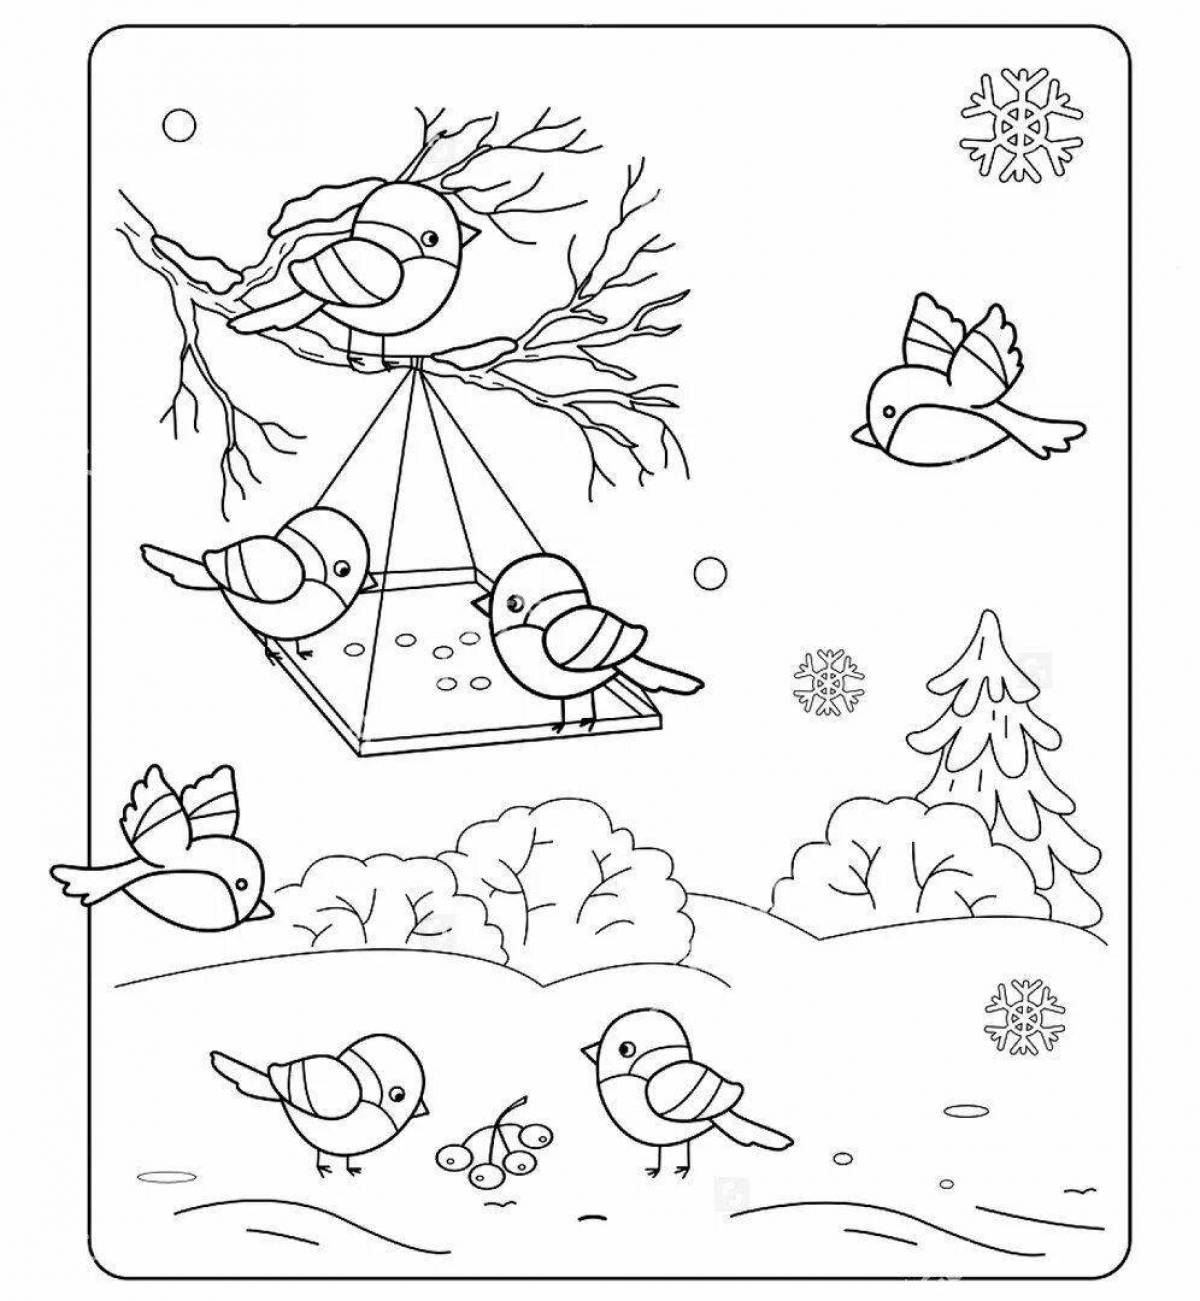 Amazing winter birds coloring book for little ones